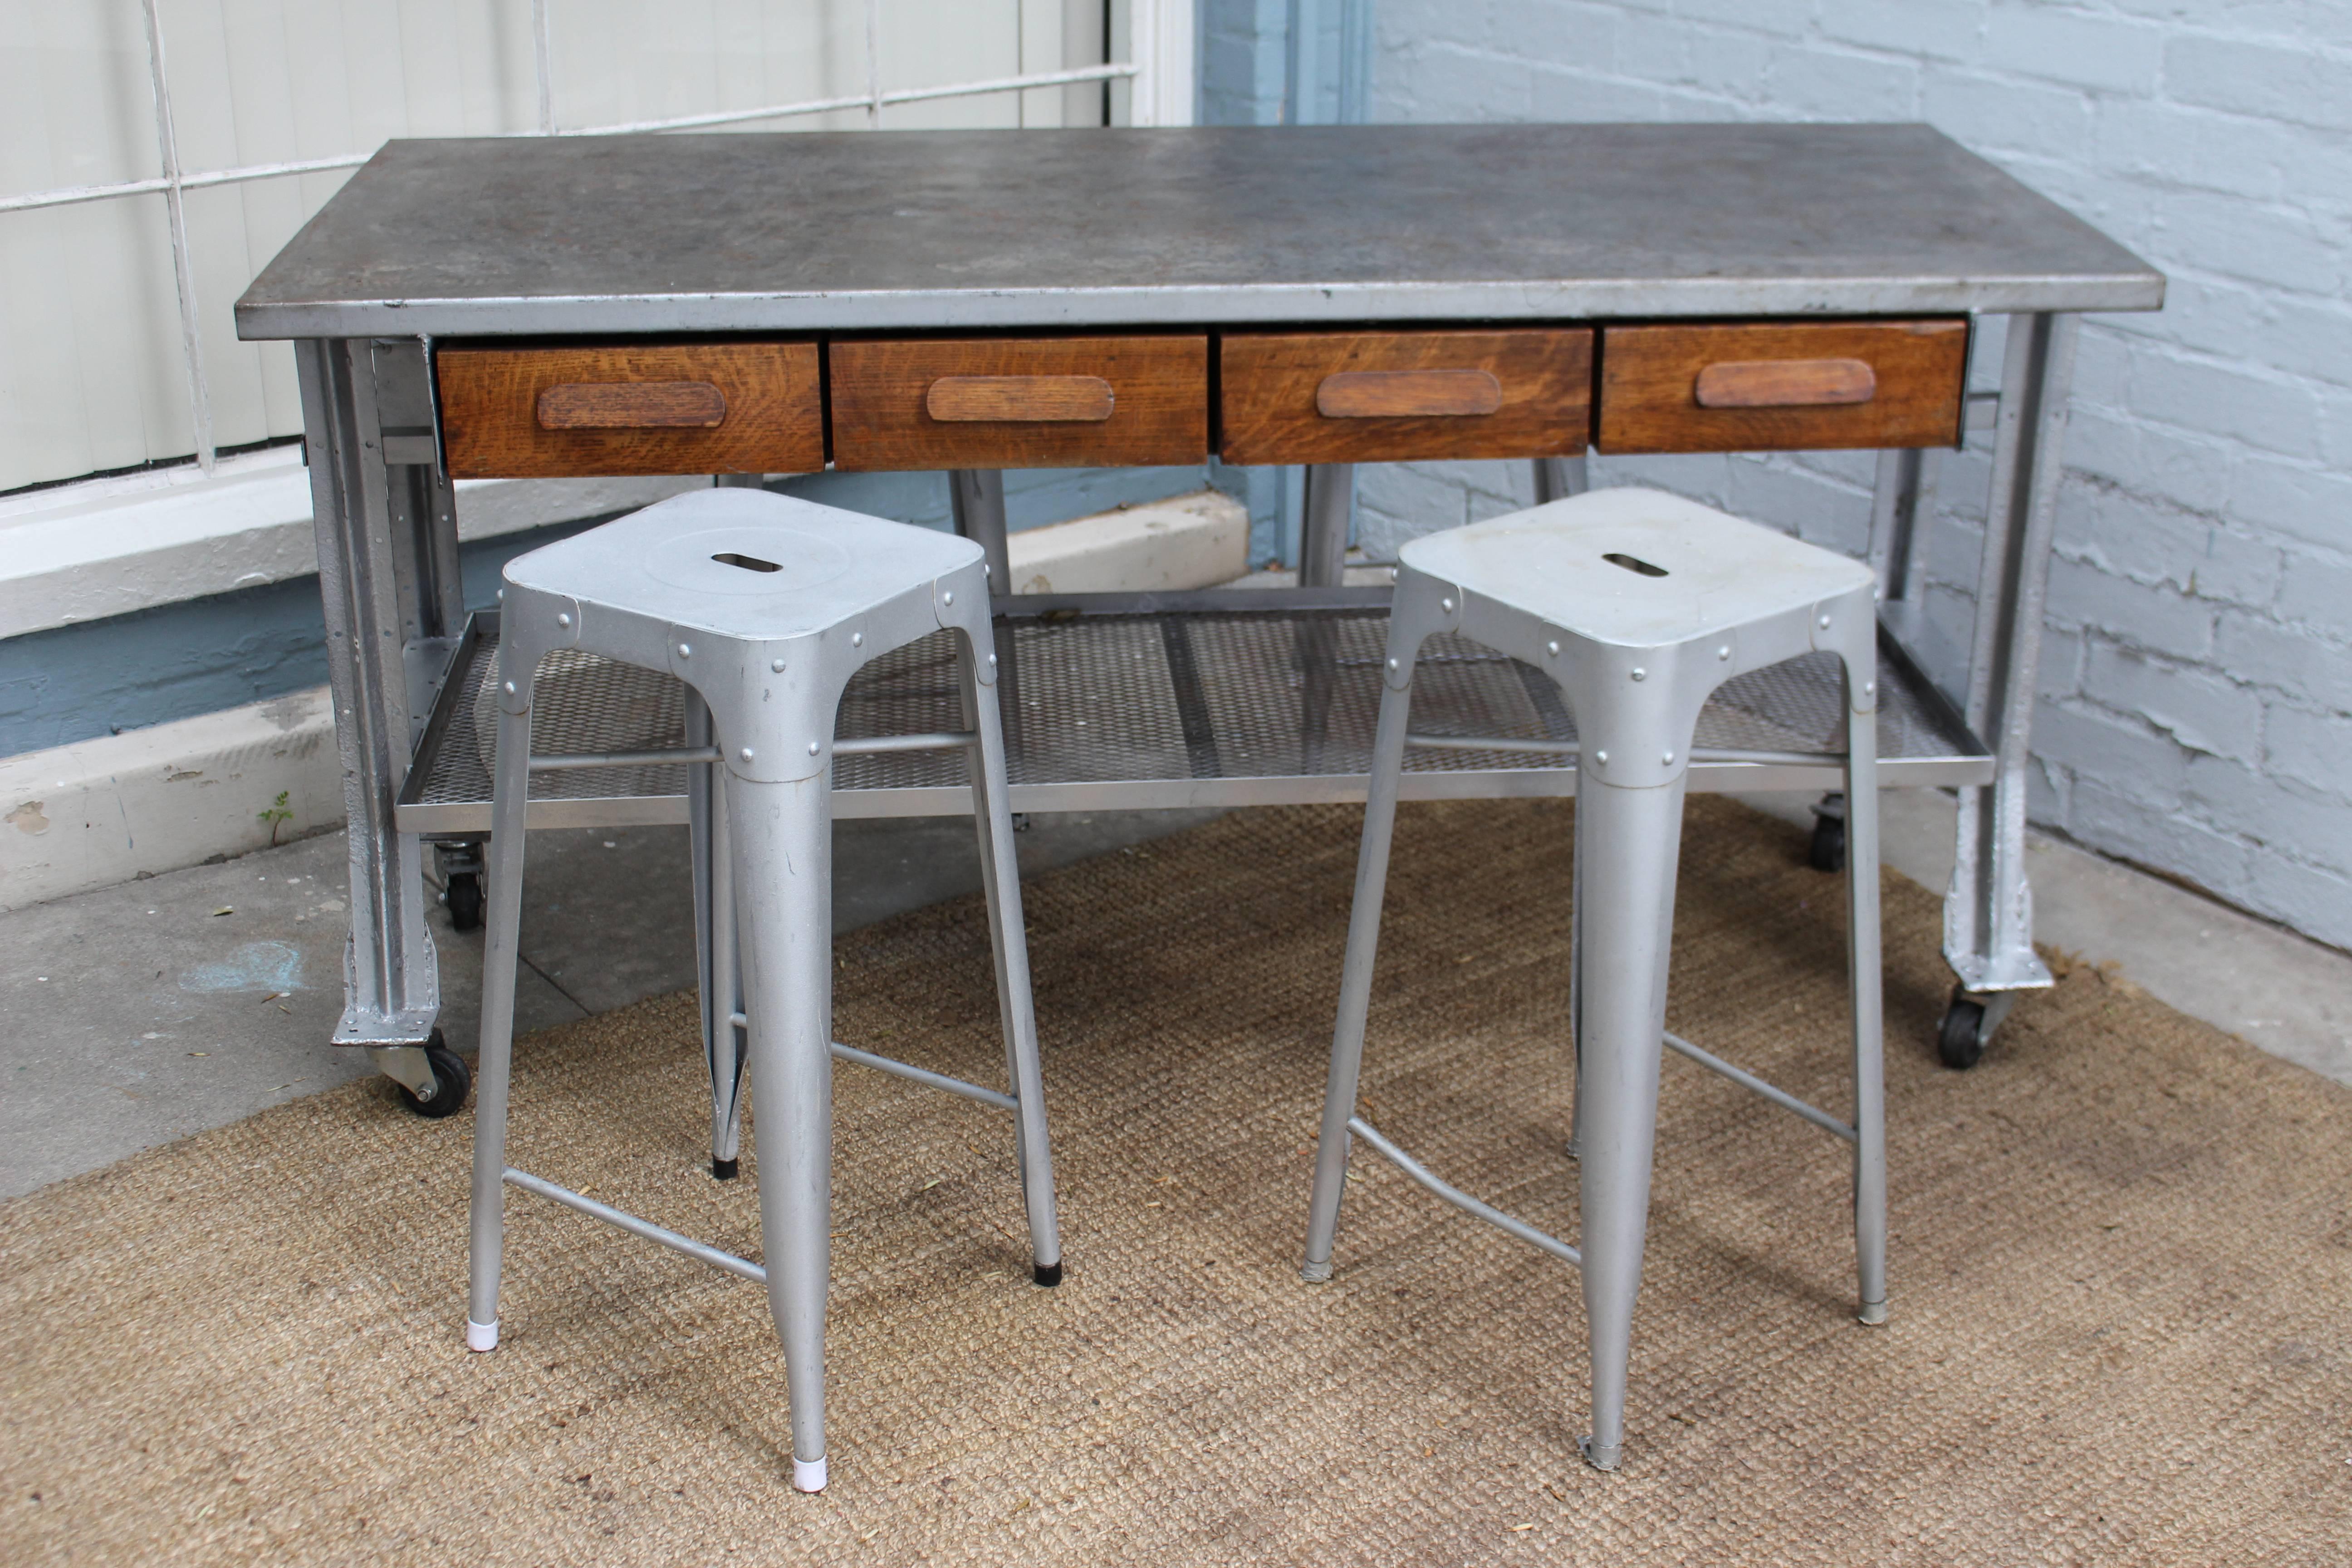 1960s Industrial table and four chairs, table can be used as a kitchen island or work table because of the wheels it can be easily move around the loft or kitchen. Also four antique oak wooden drawer as artist touch.
Chairs dimensions: H 30, W